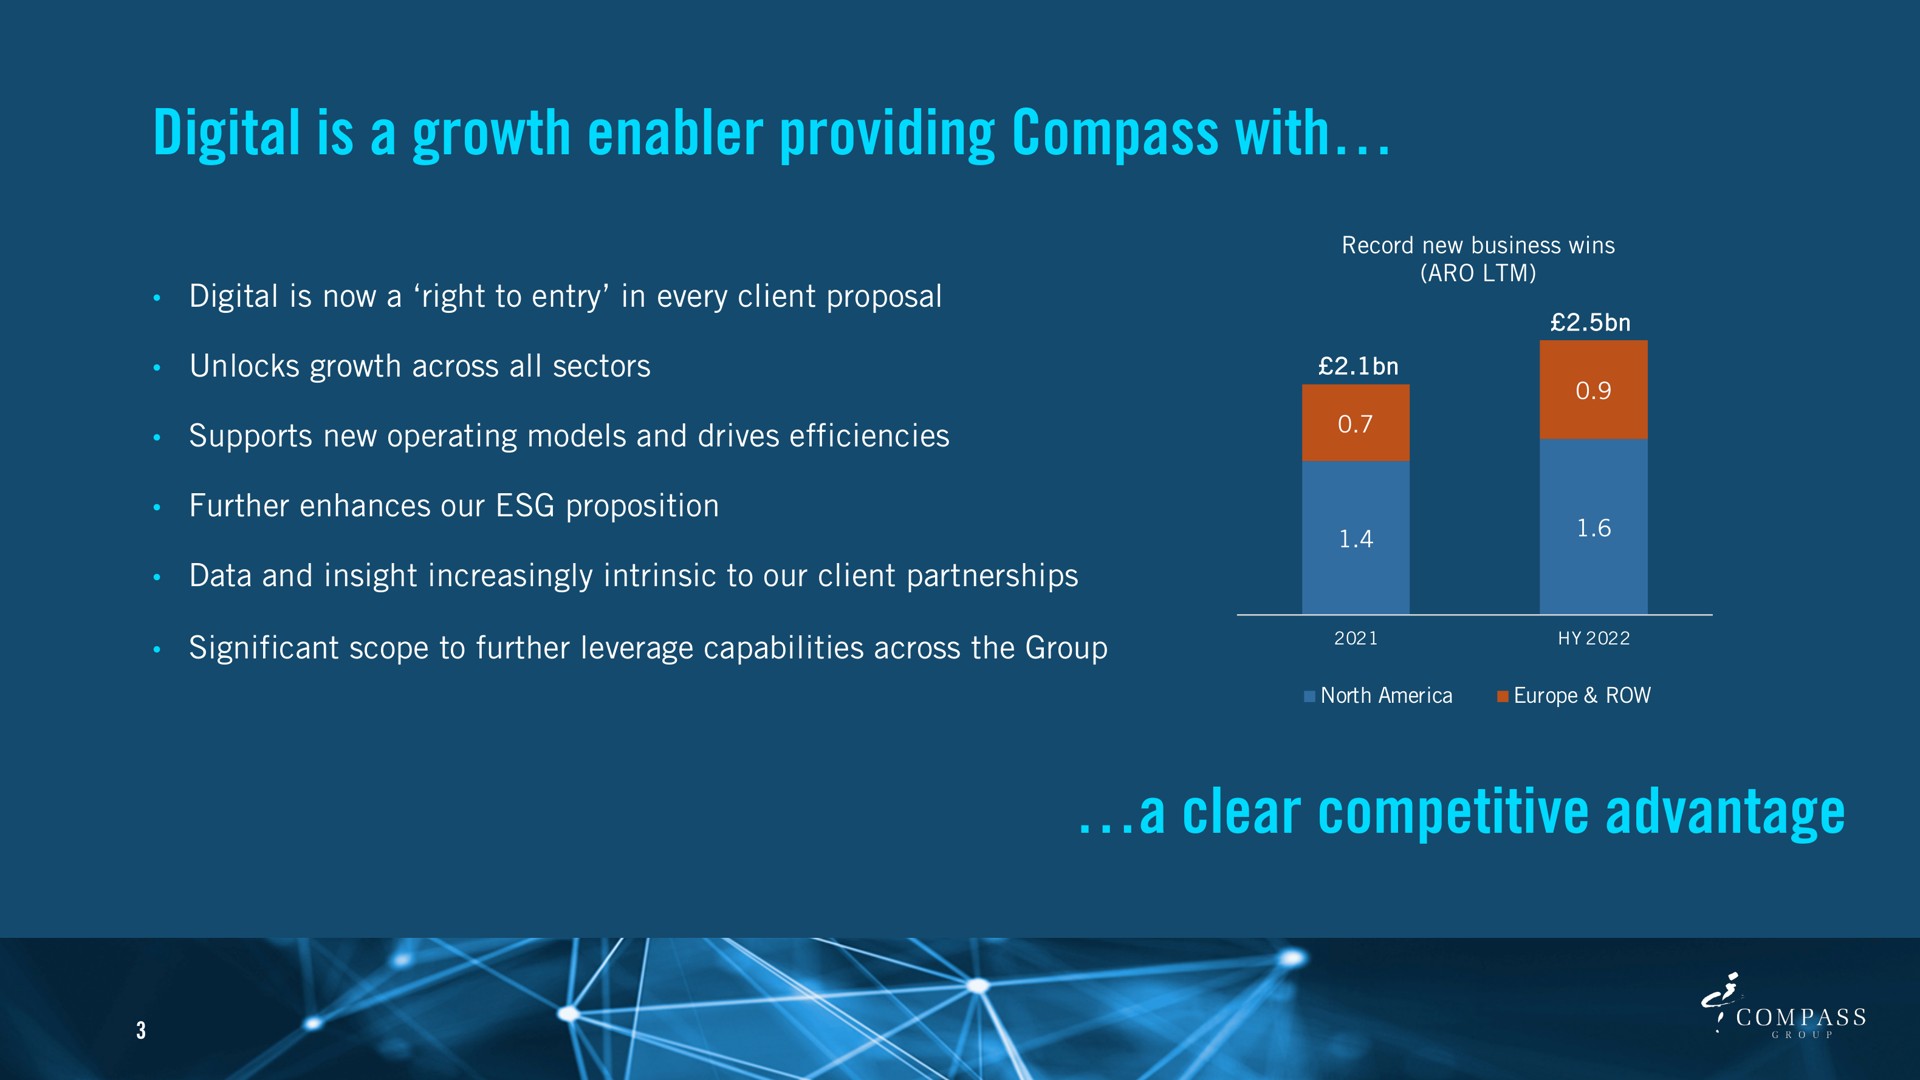 digital is a growth enabler providing compass with a clear competitive advantage | Compass Group